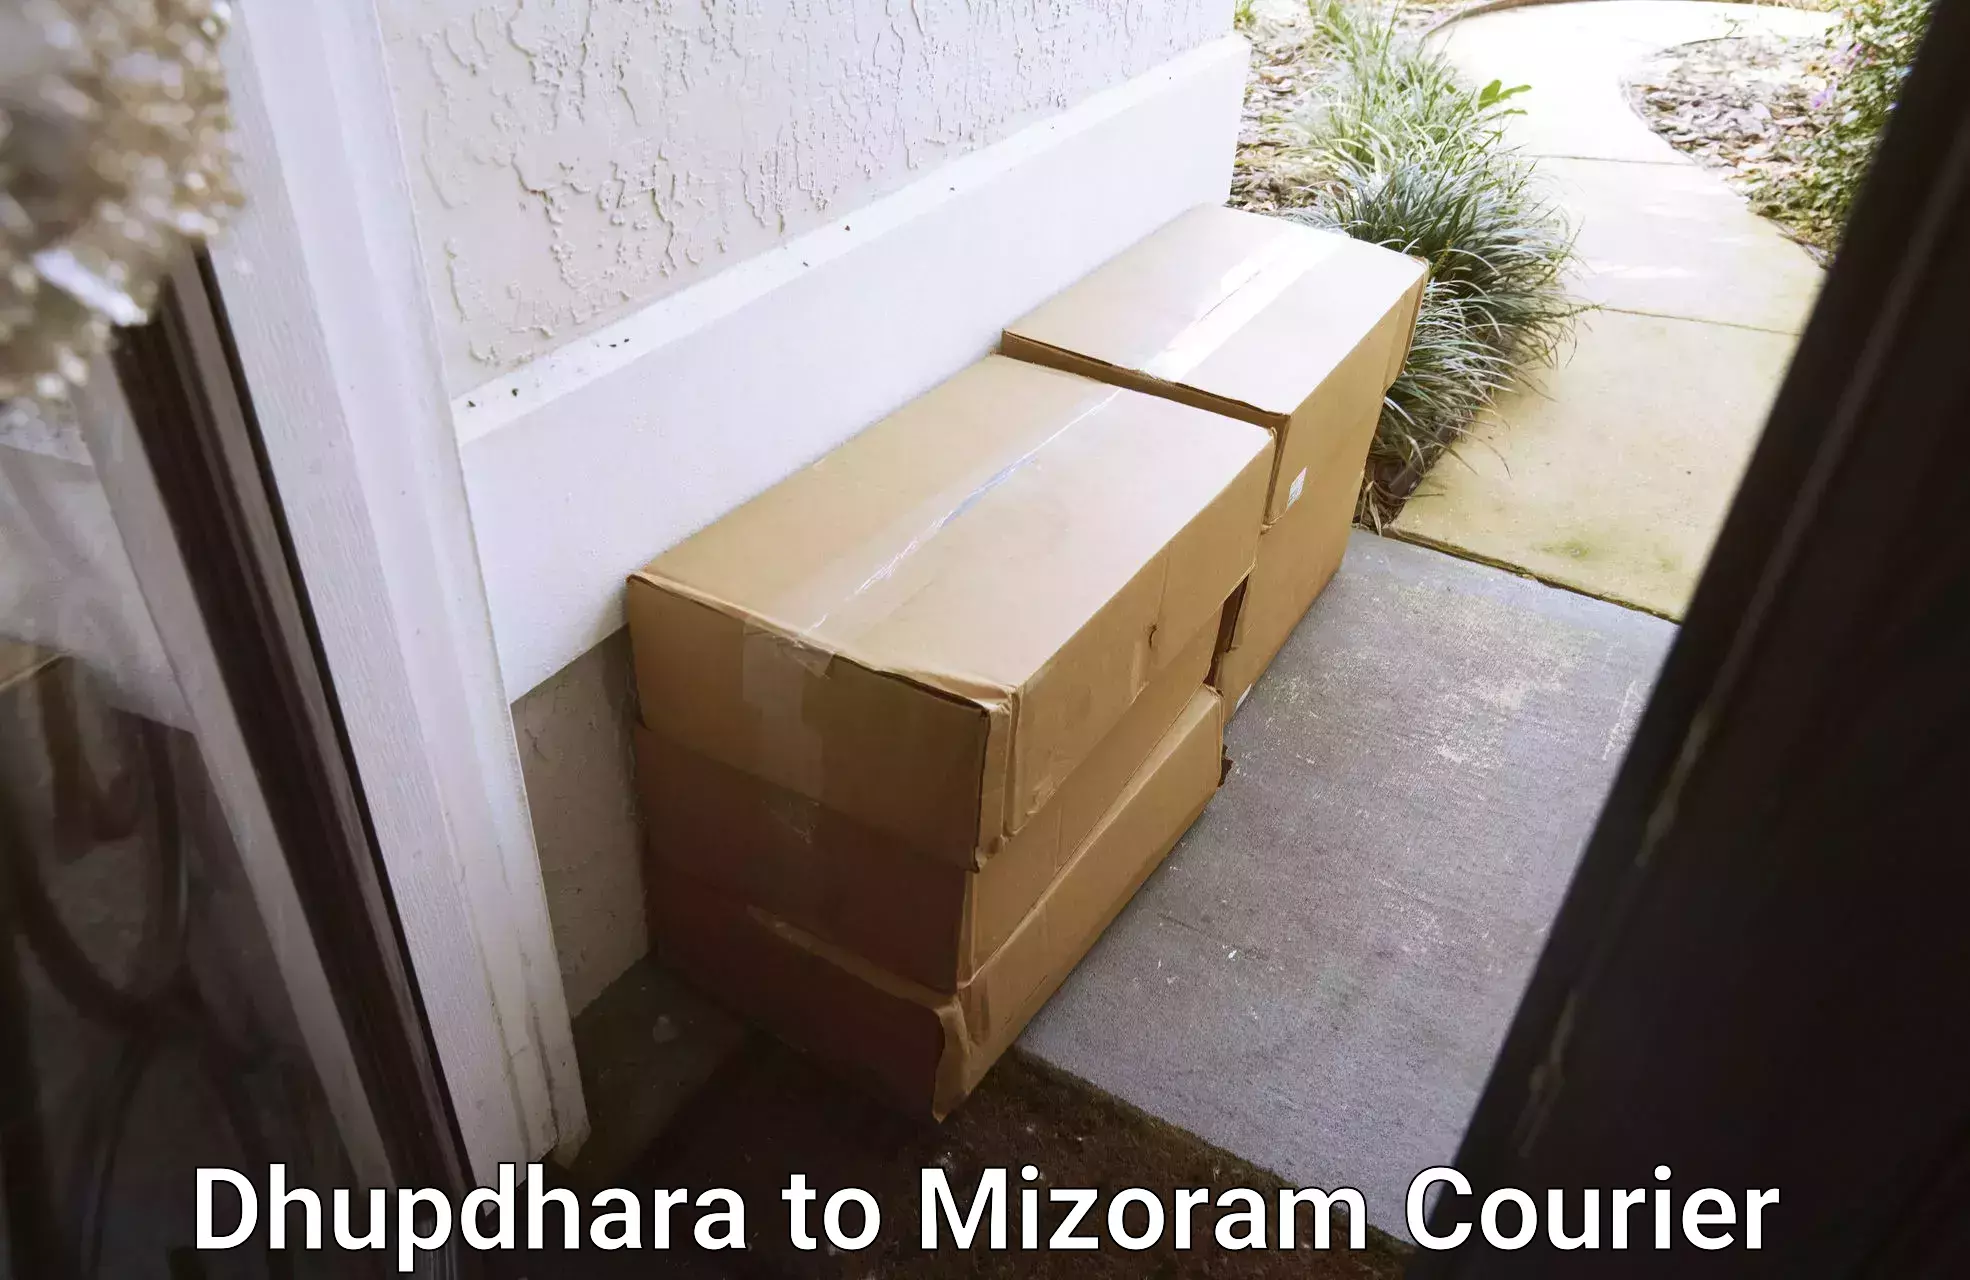 Efficient package consolidation Dhupdhara to Mizoram